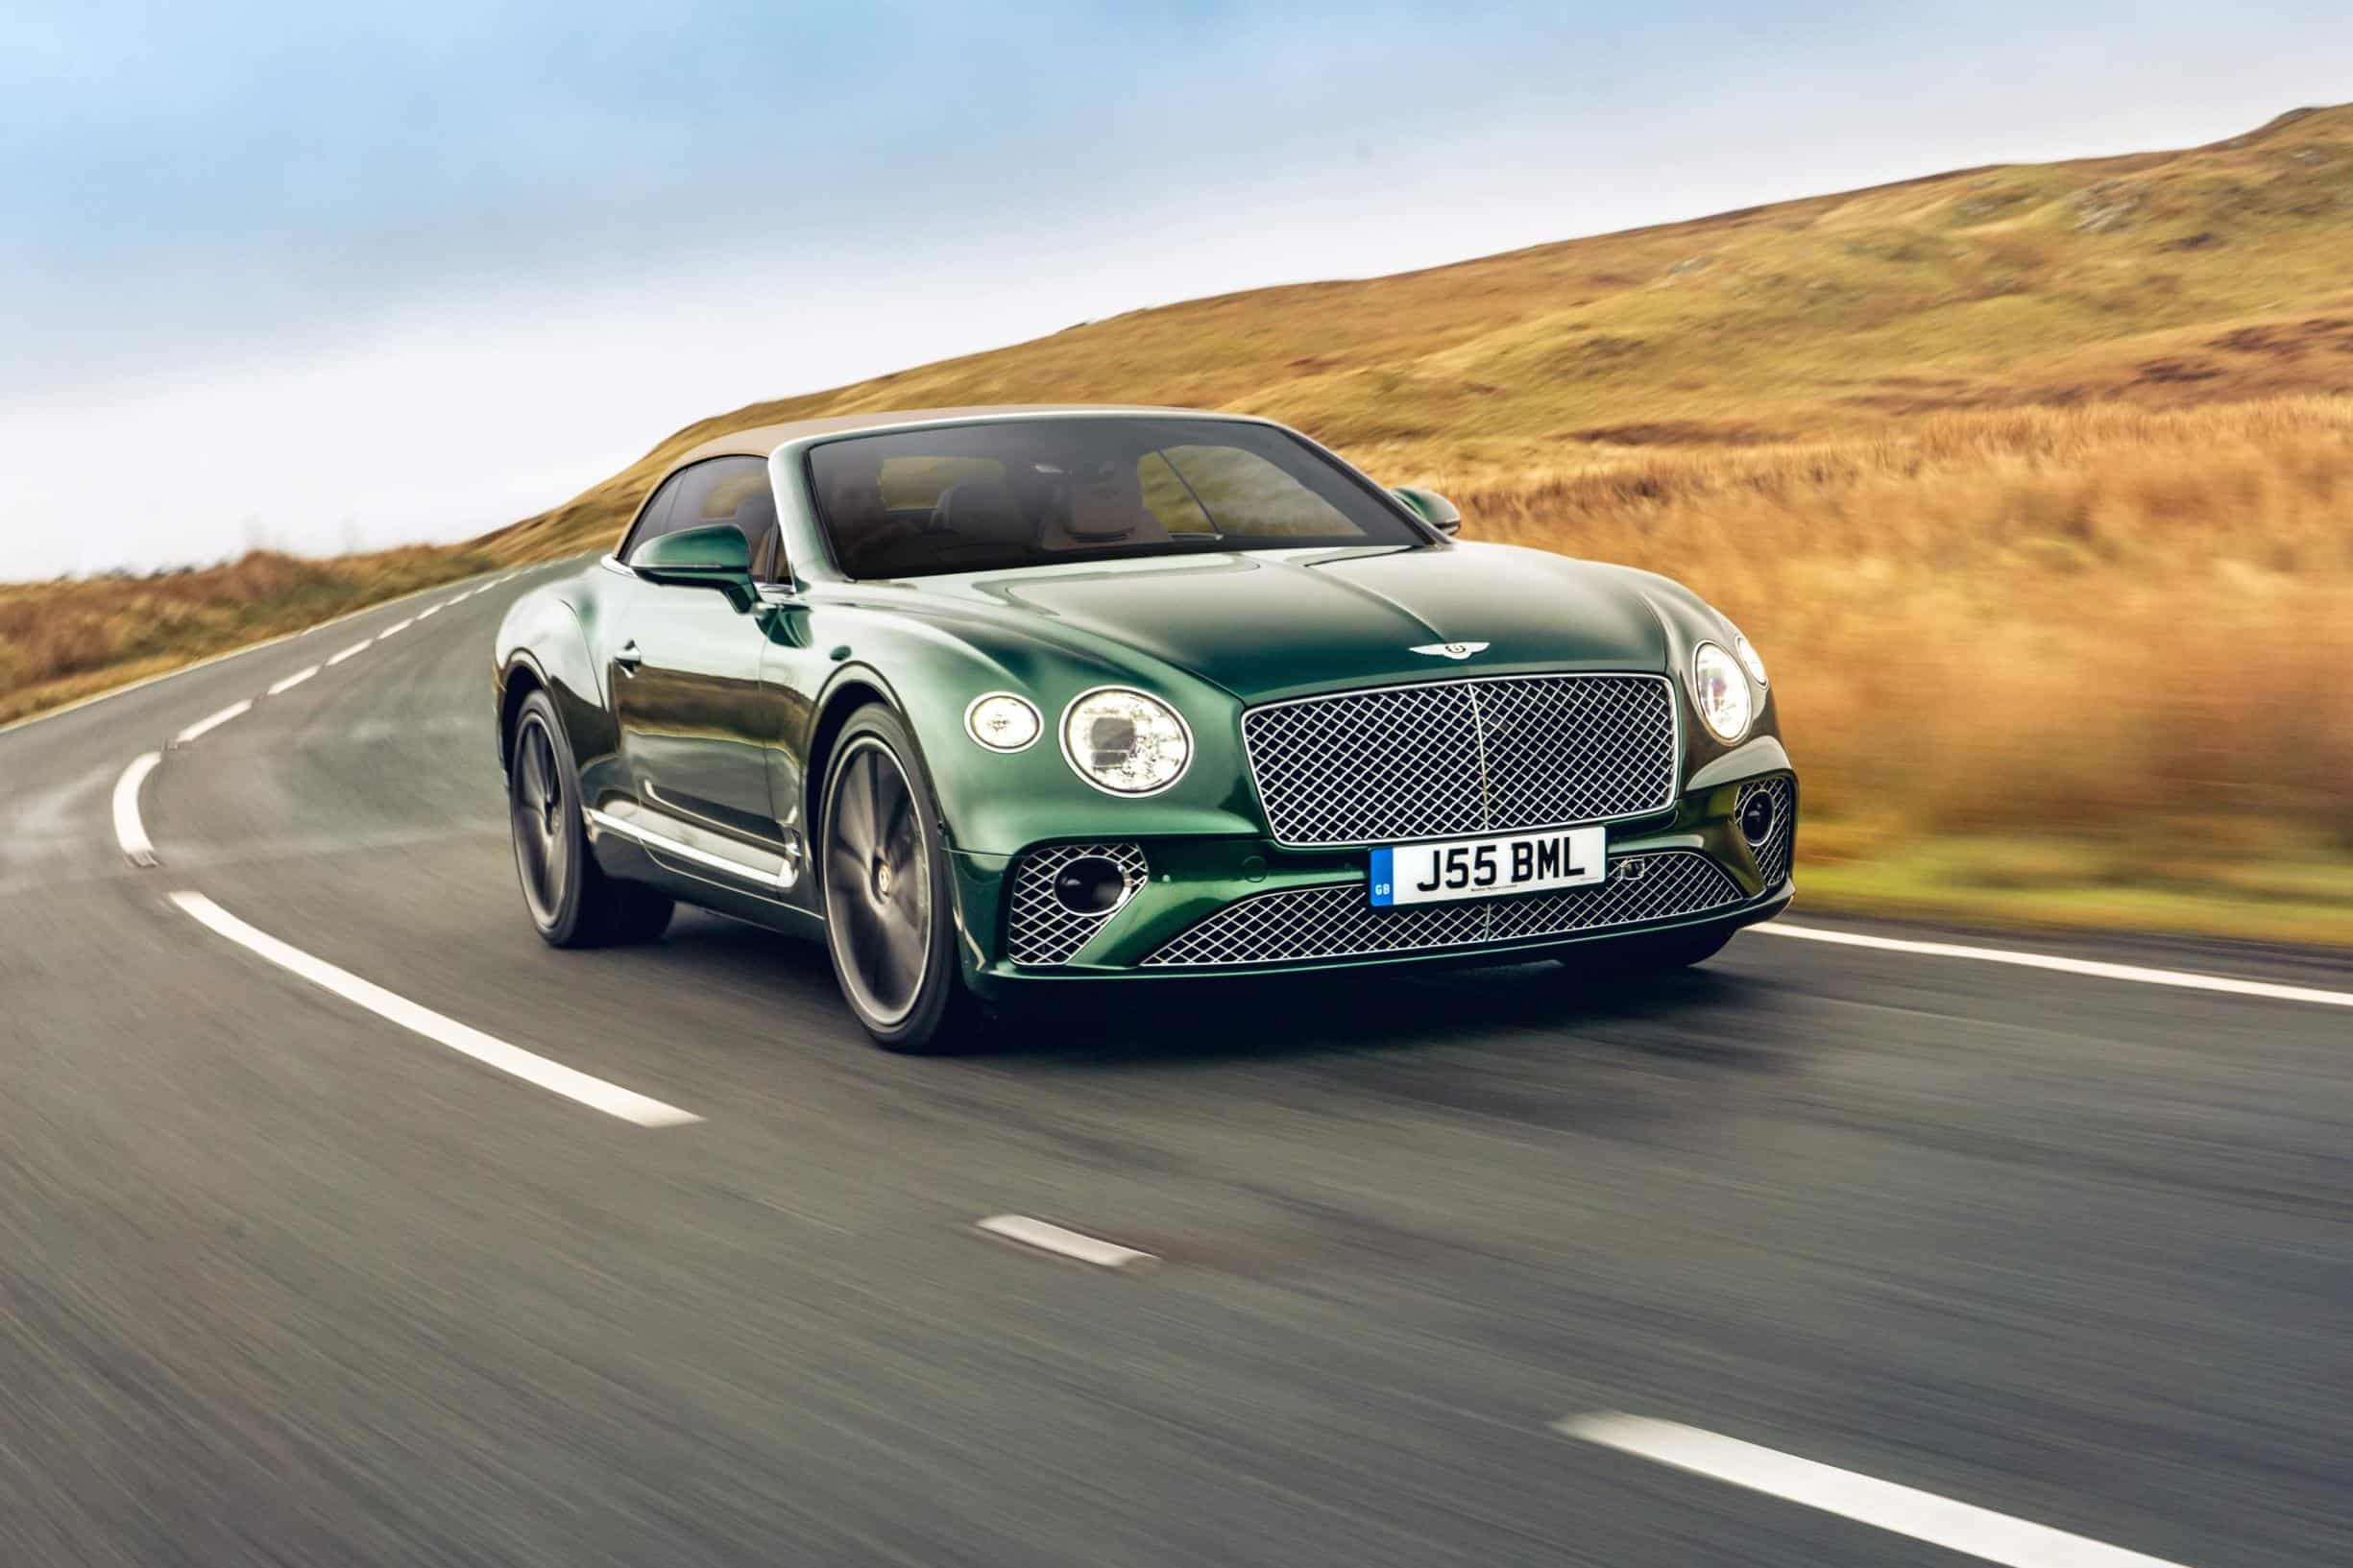 BENTLEY INTRODUCES TWEED INTERIOR OPTIONS FOR THE COMPLETE PRODUCT PORTFOLIO